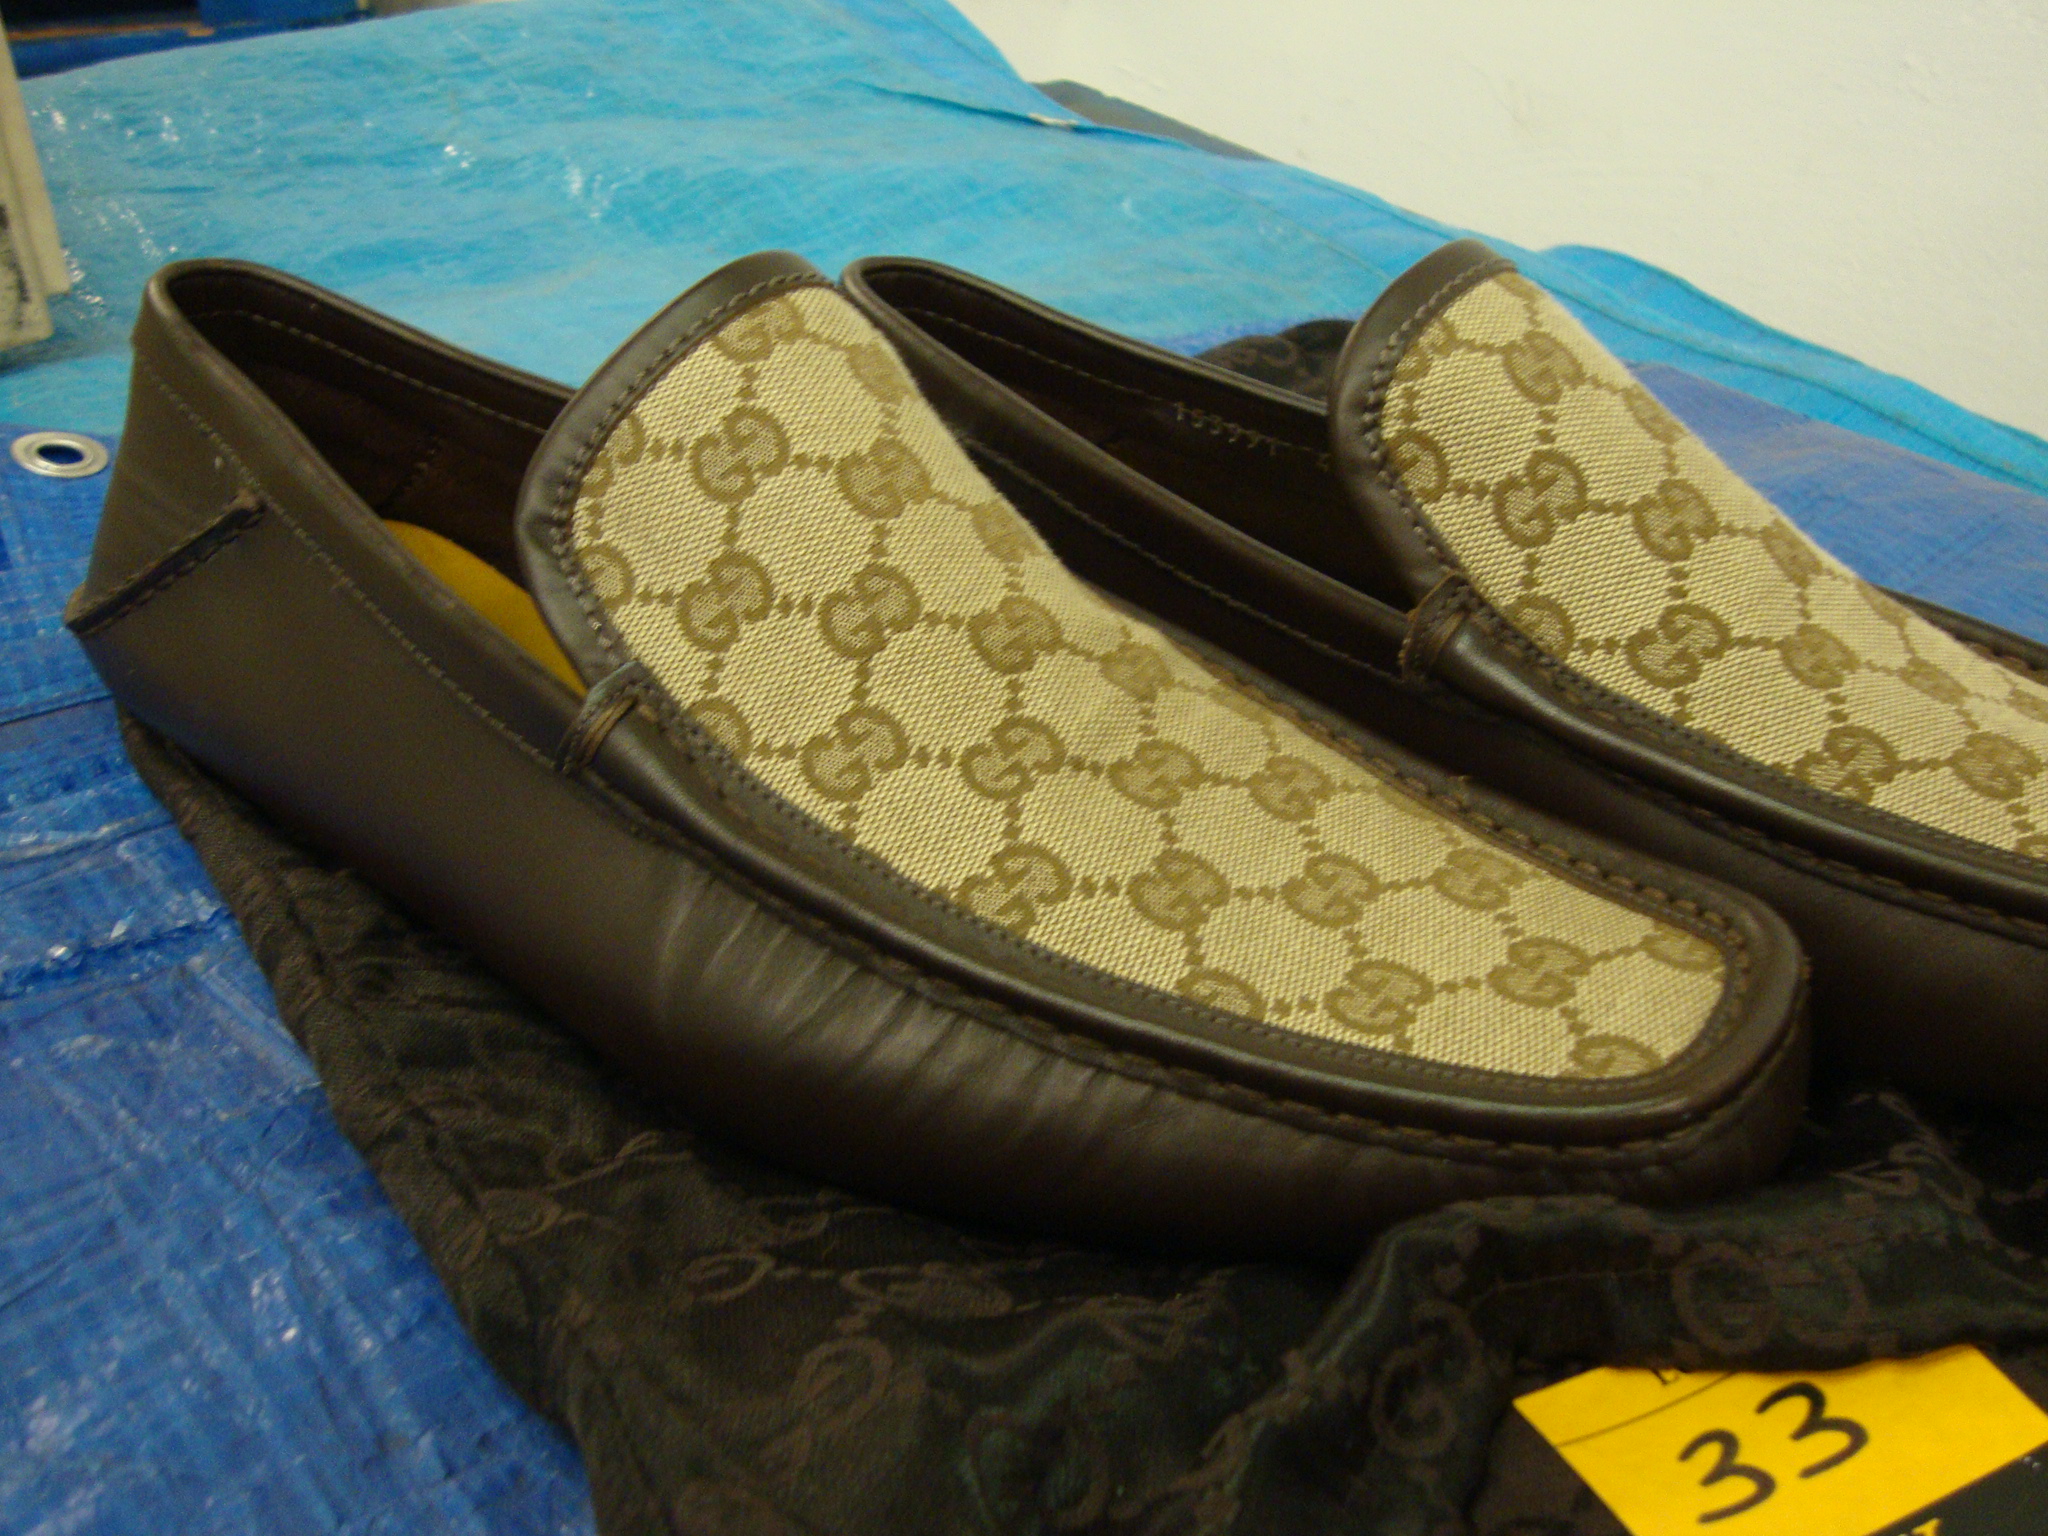 Pair of Gucci men's loafers/driving shoes in chocolate brown leather plus Gucci fabric upper. Size - Image 2 of 5